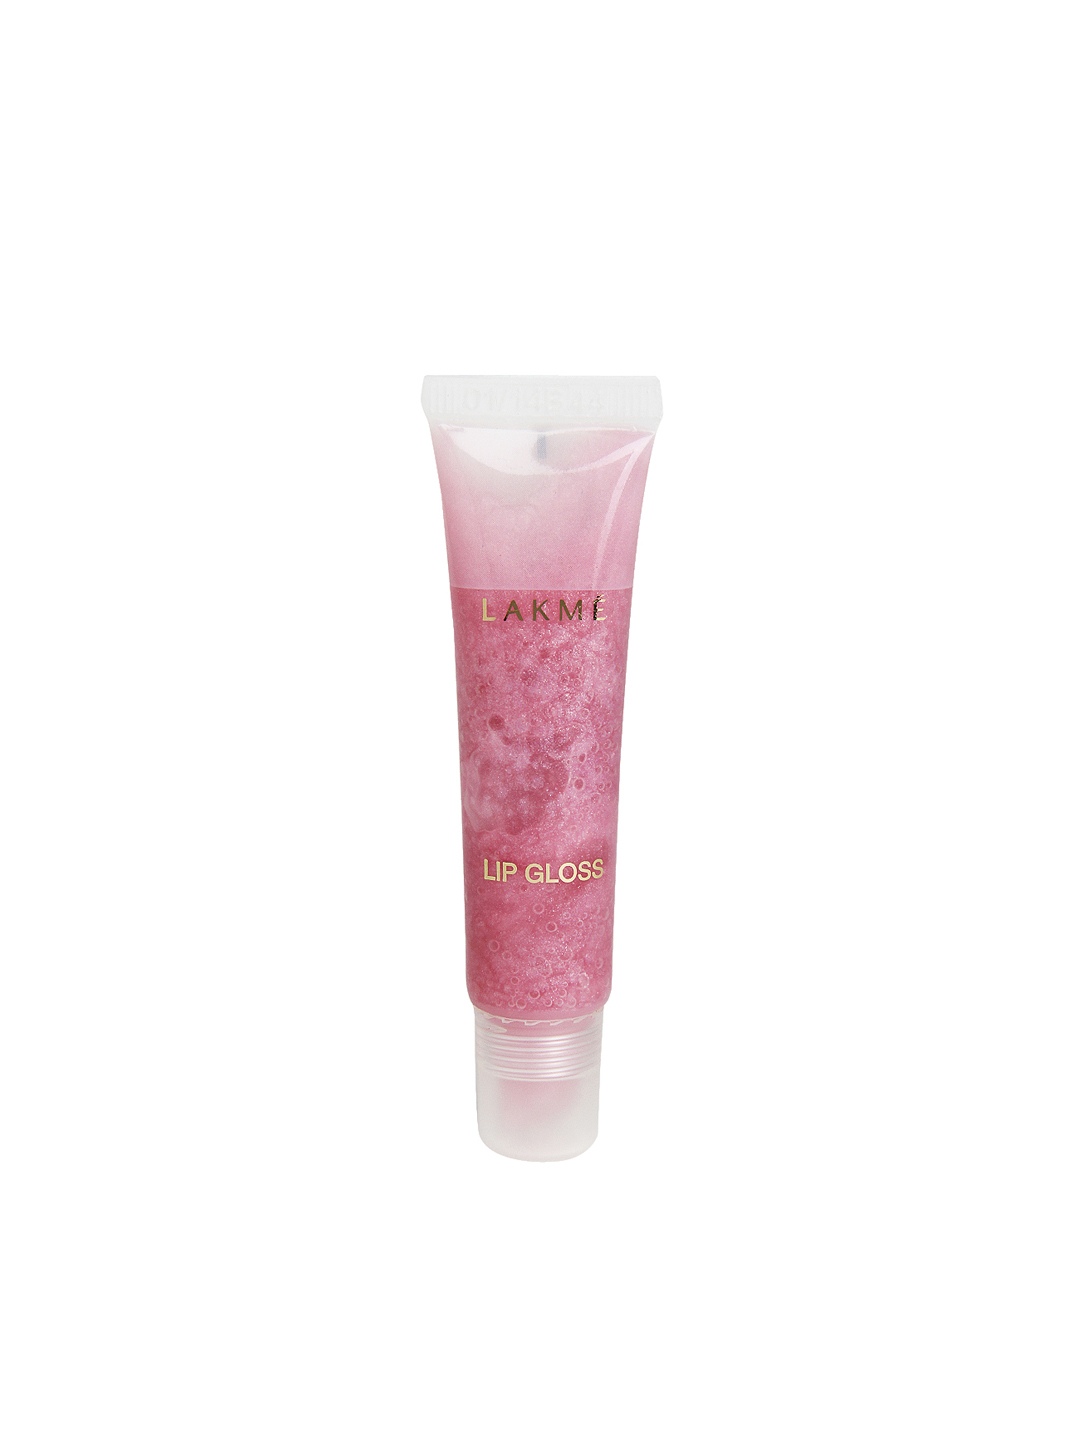 Lakme Bubblegum Lip Gloss available at Myntra for Rs.175